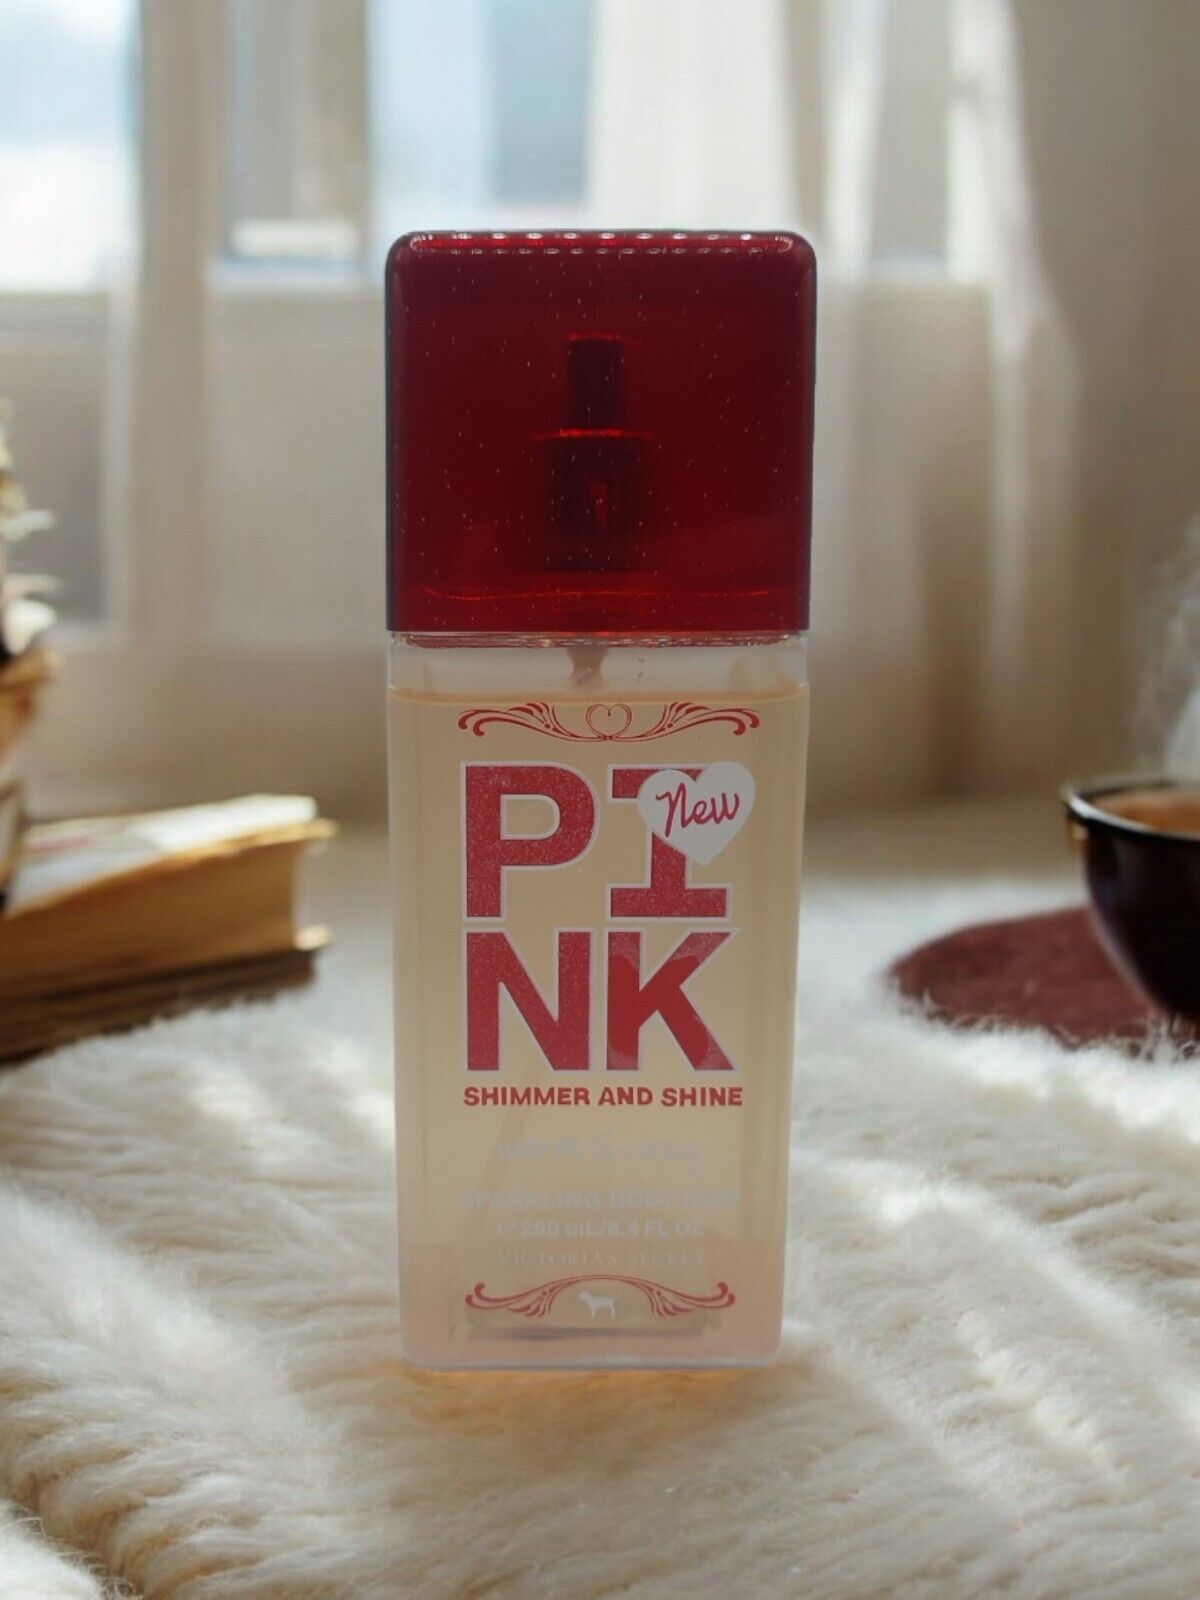 VICTORIA'S SECRET PINK SHIMMER AND SHINE WARM & COZY BODY MIST 8.4 97% Full